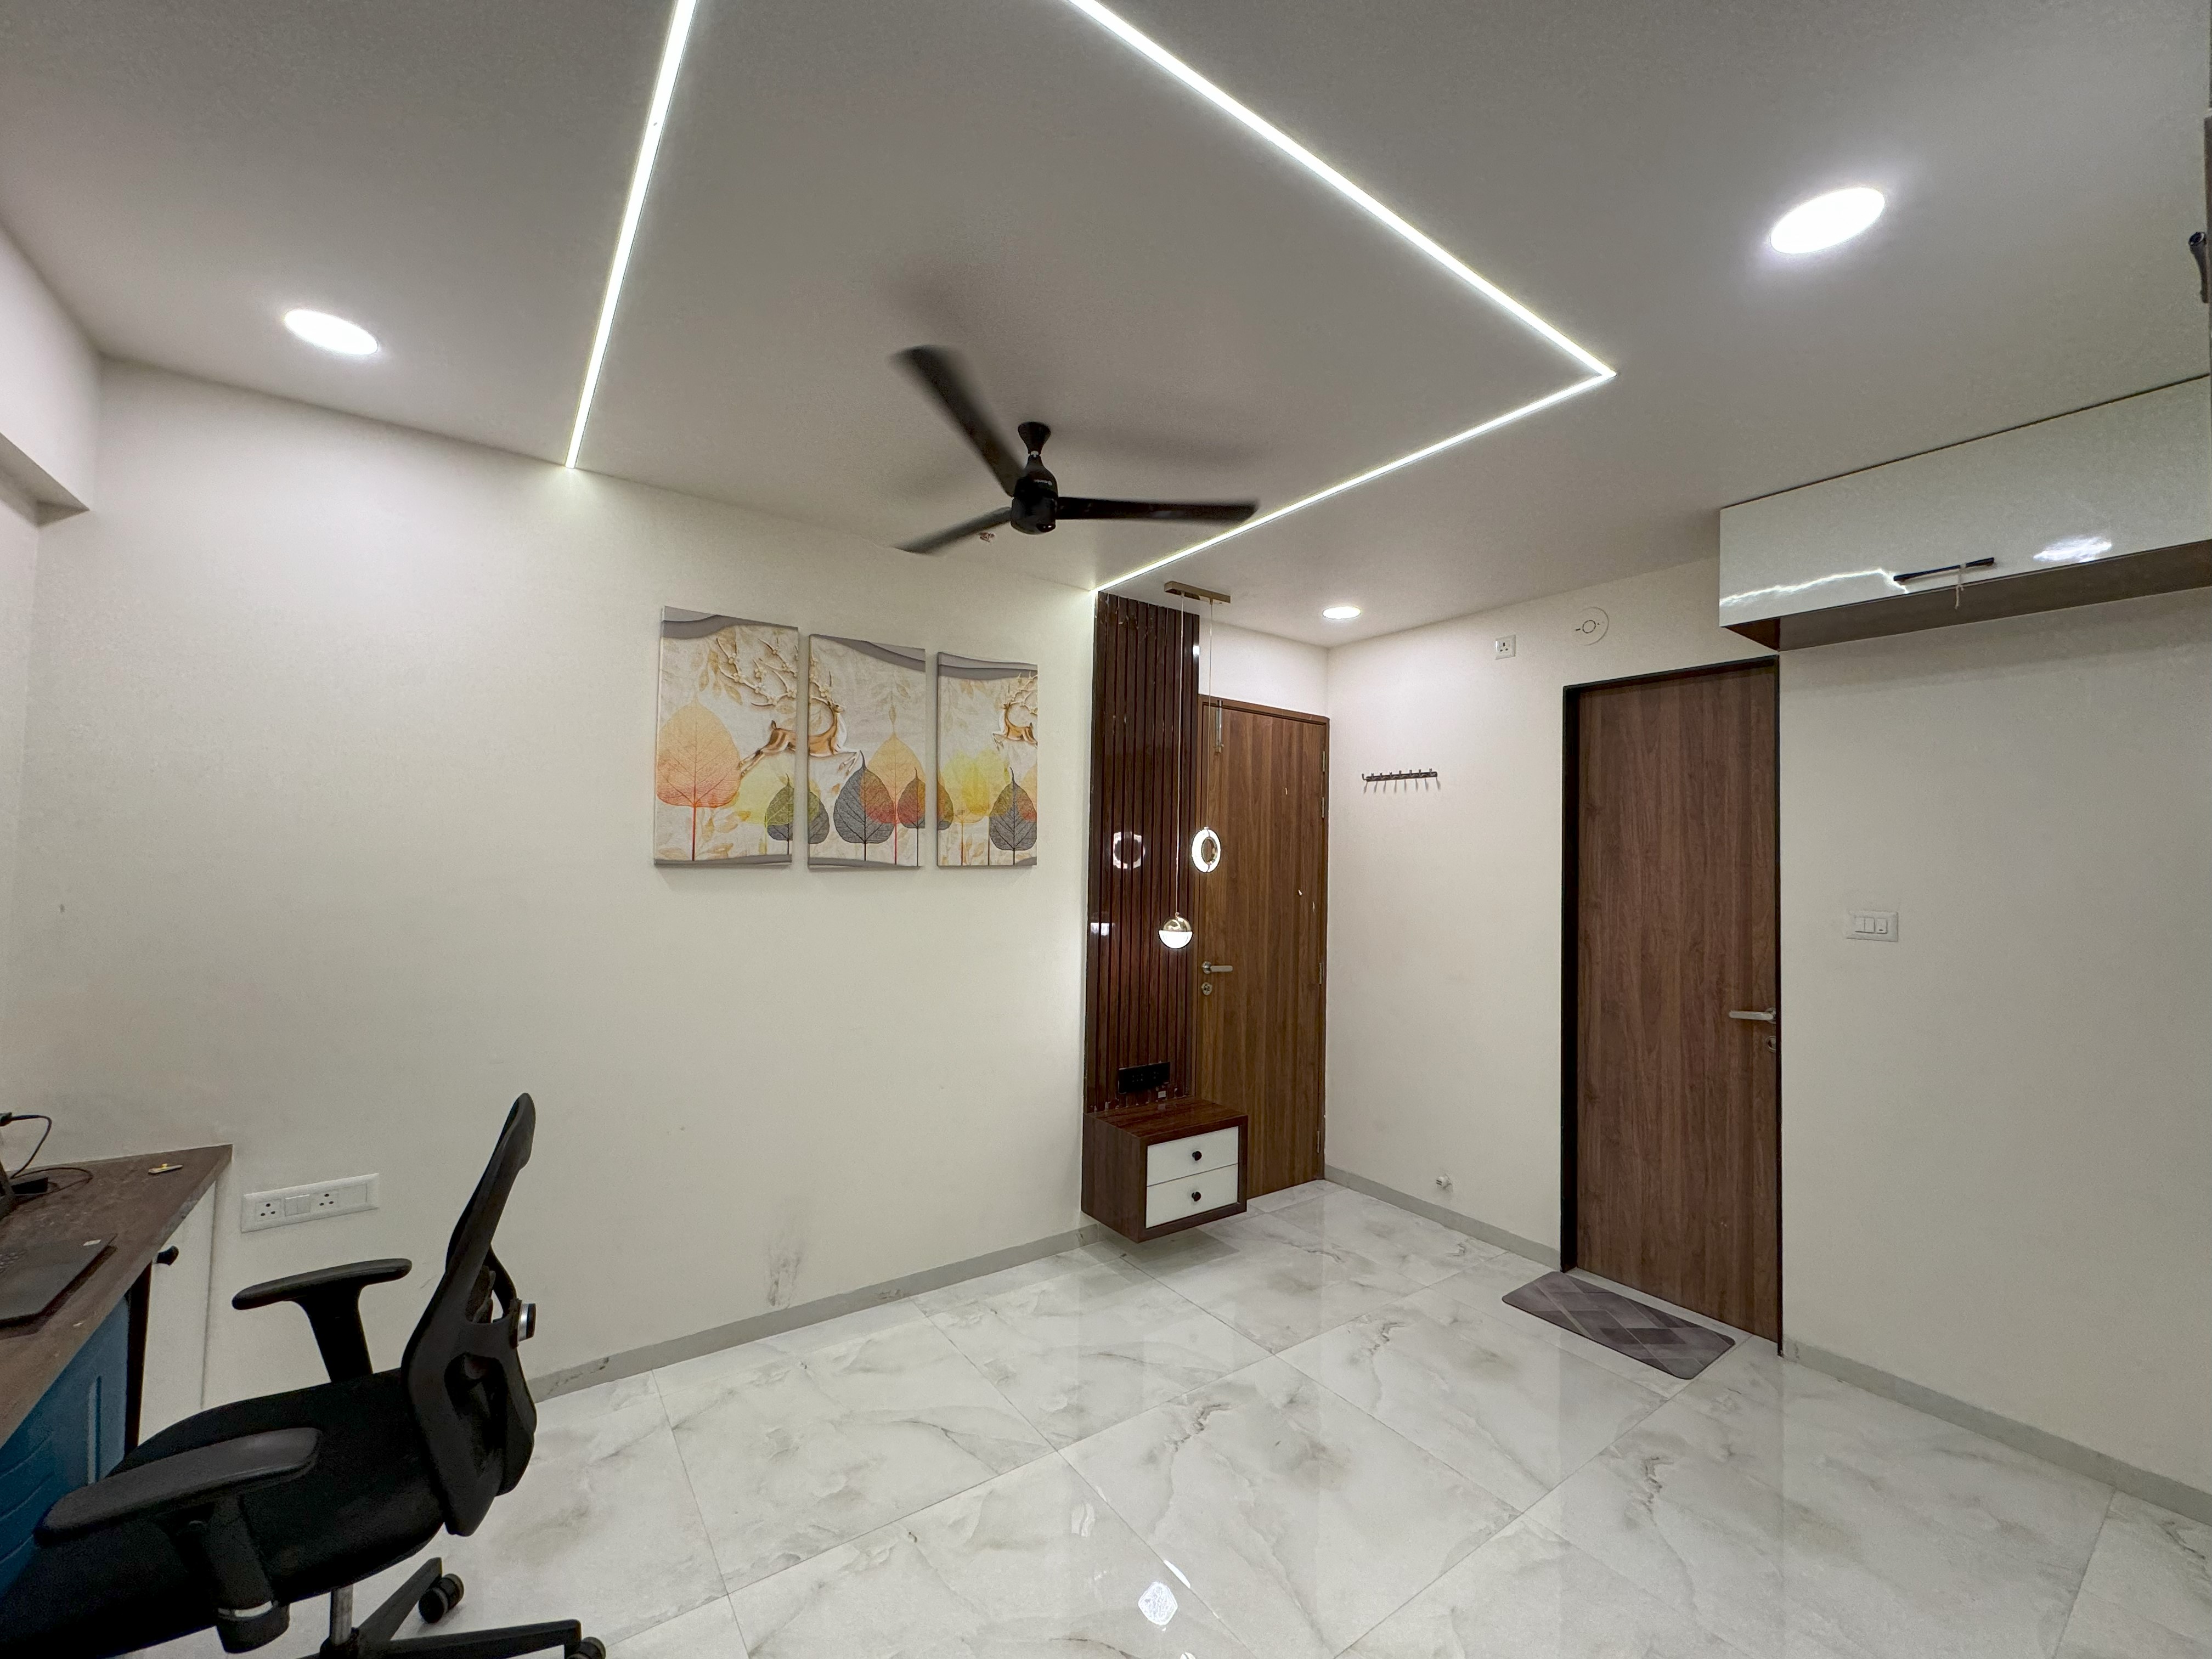 Architectural Planning Company in Baner